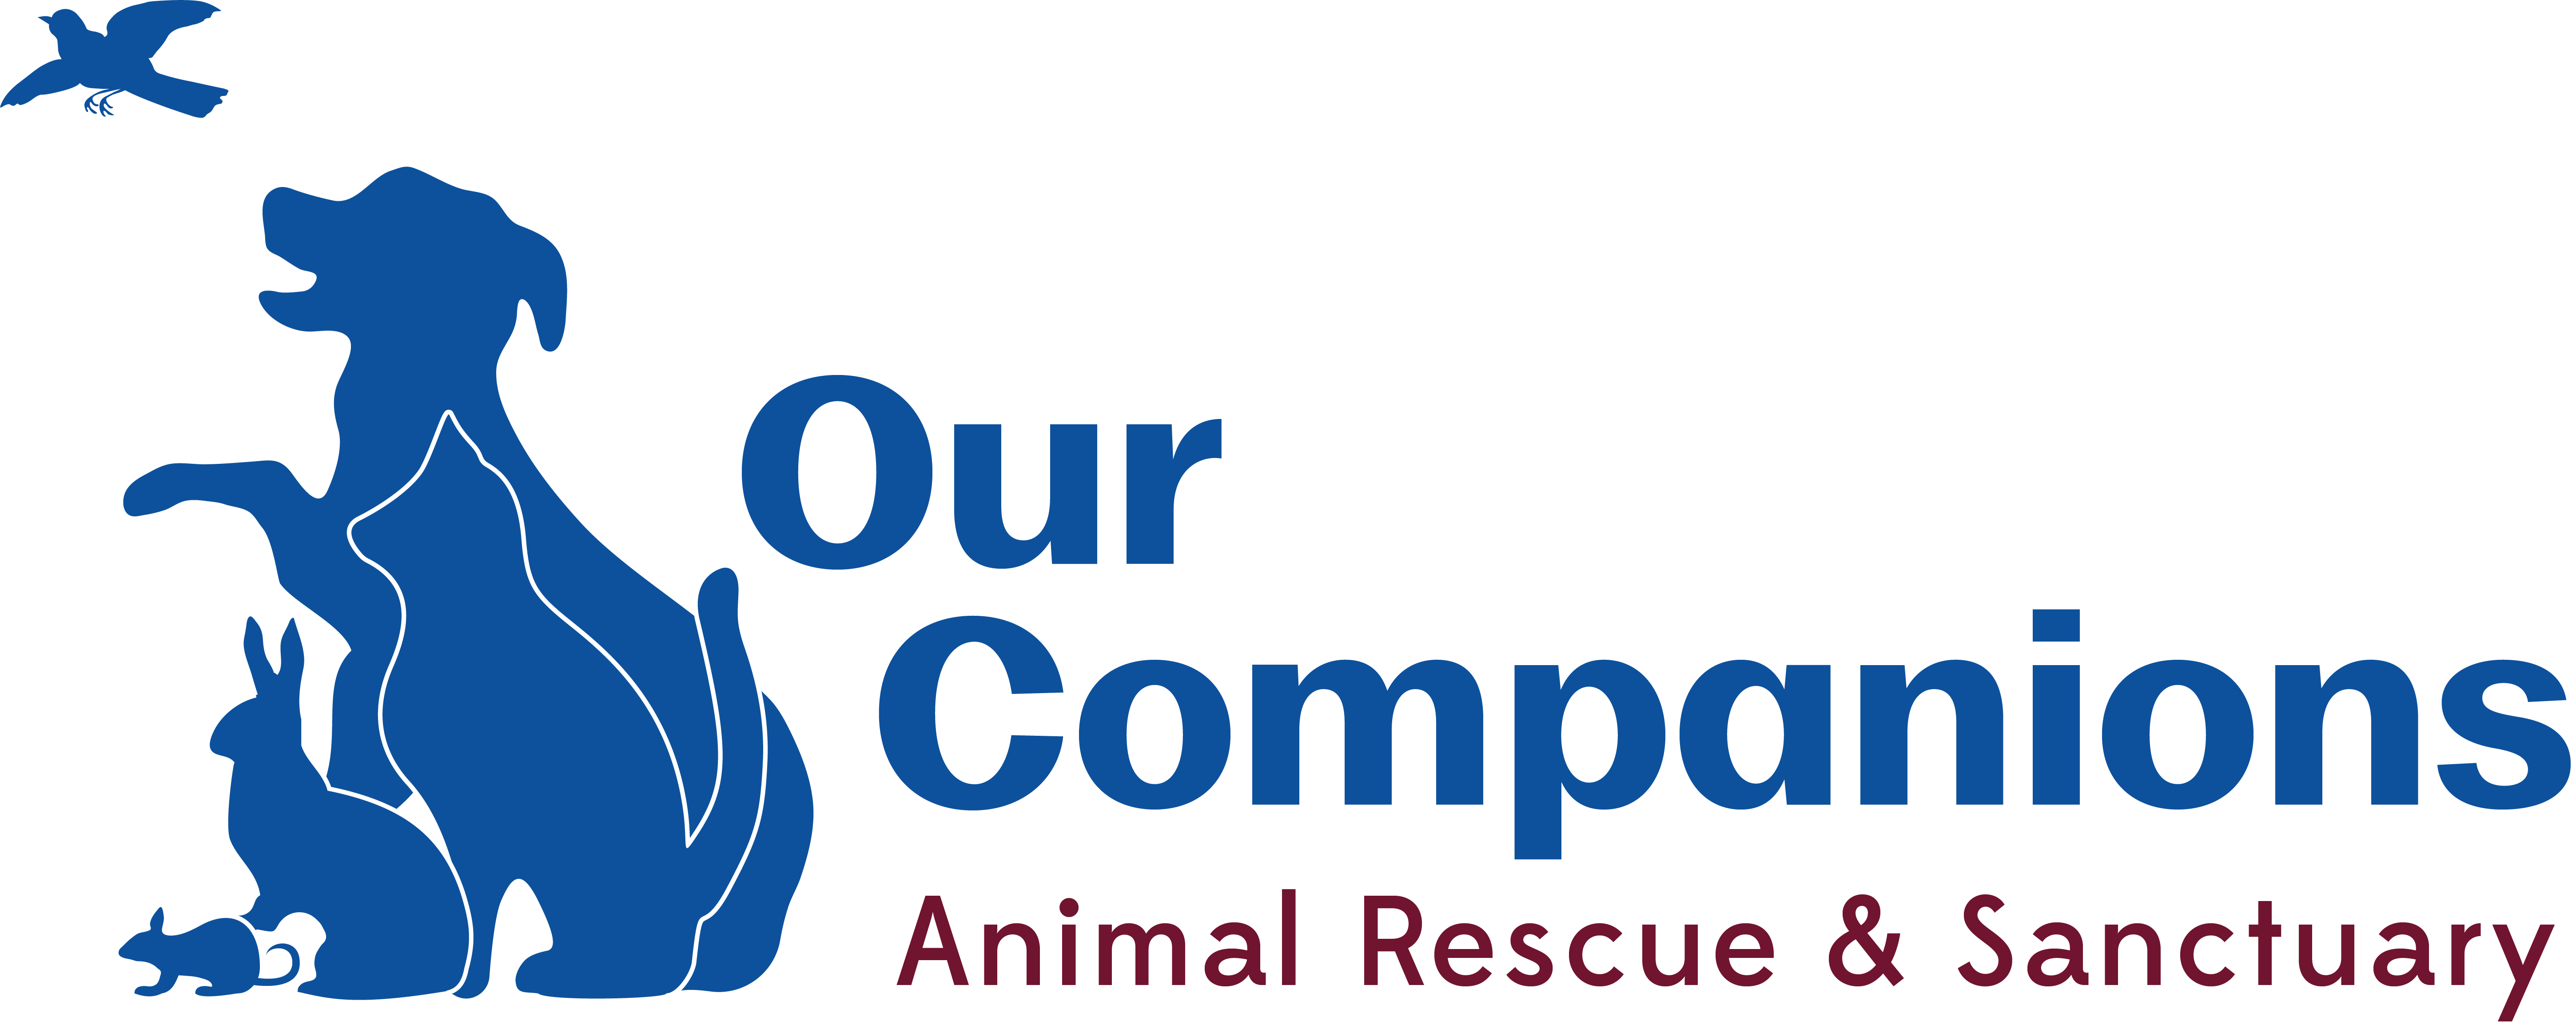 Home - Our Companions Animal Rescue